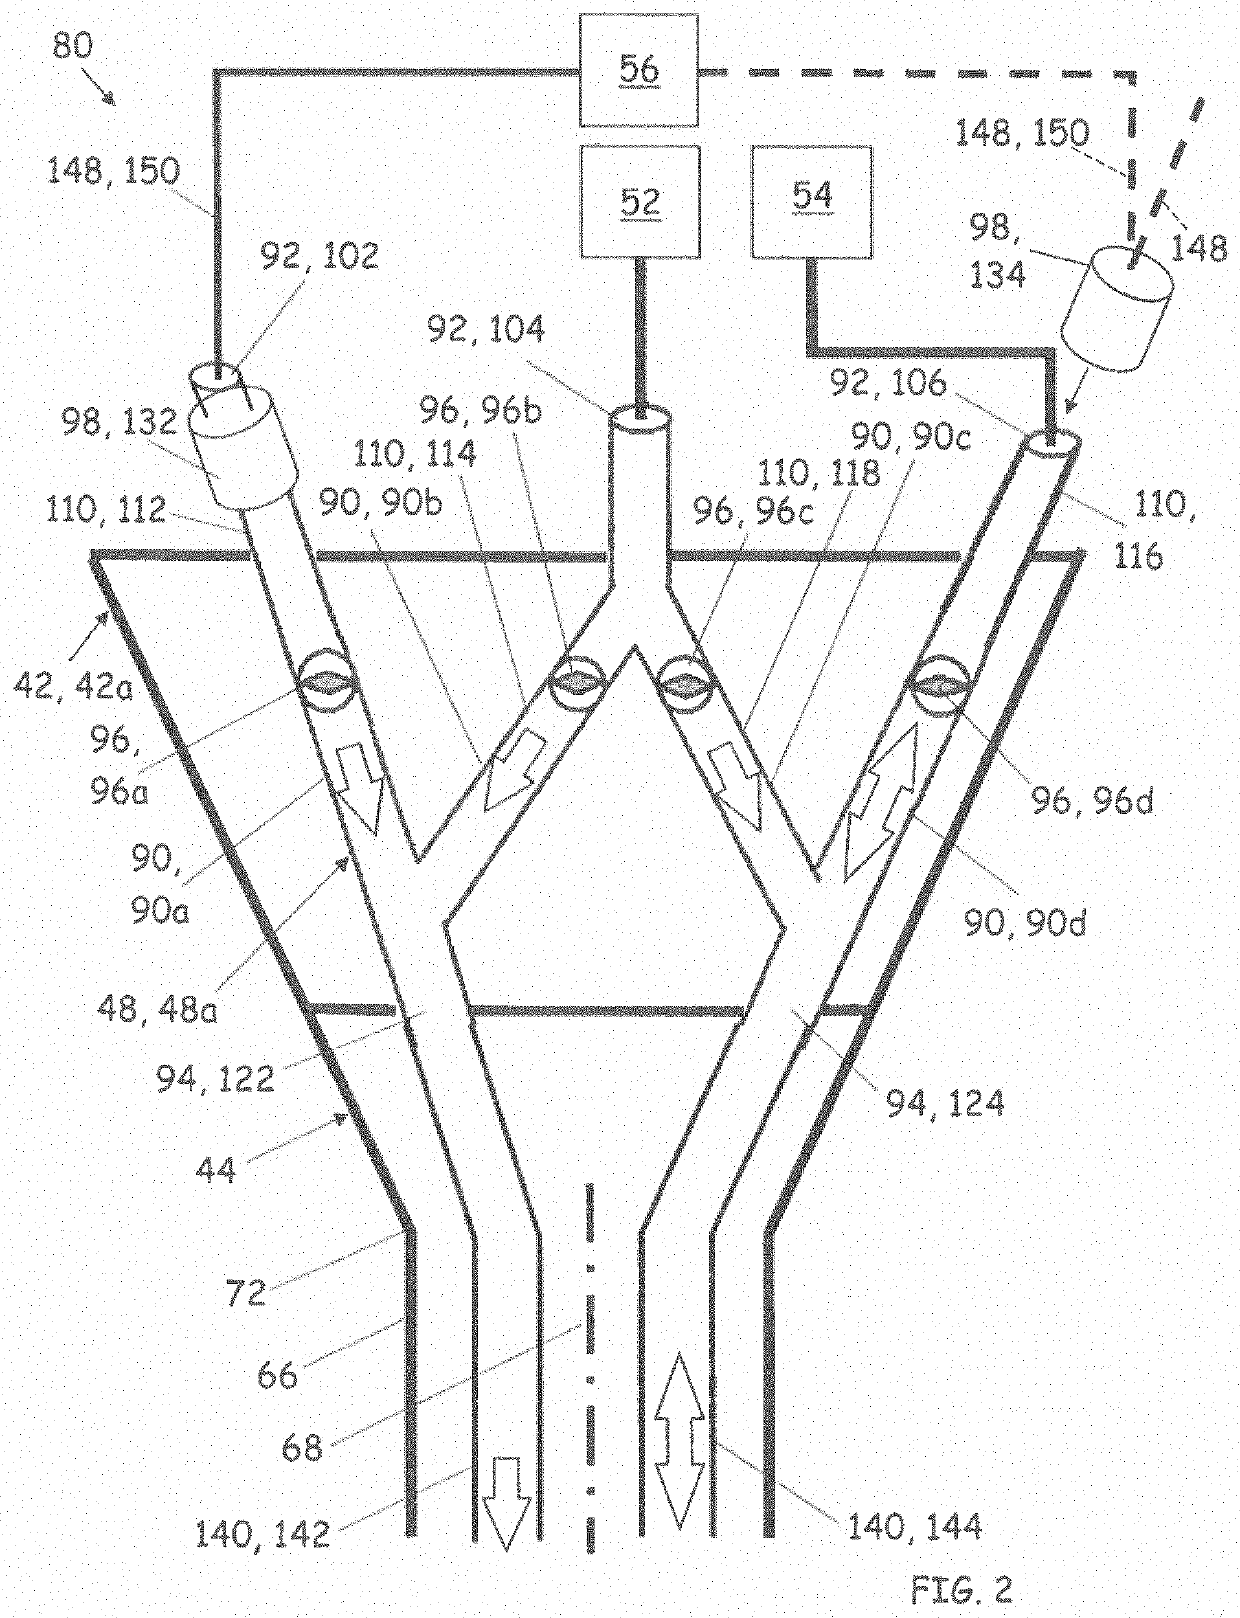 Steering handle with multi-channel manifold